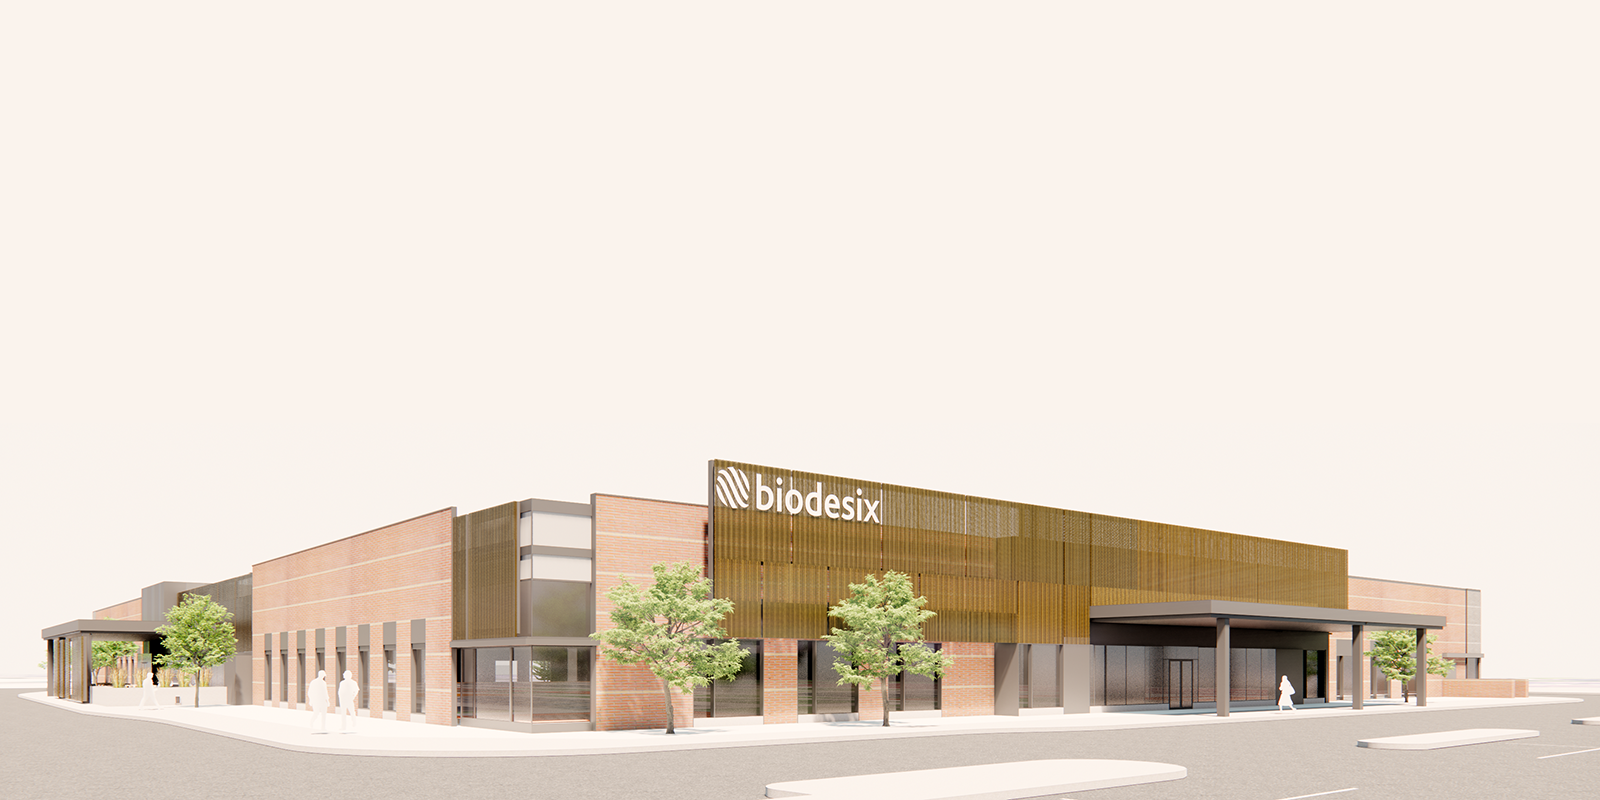 exterior rendering of building from street view